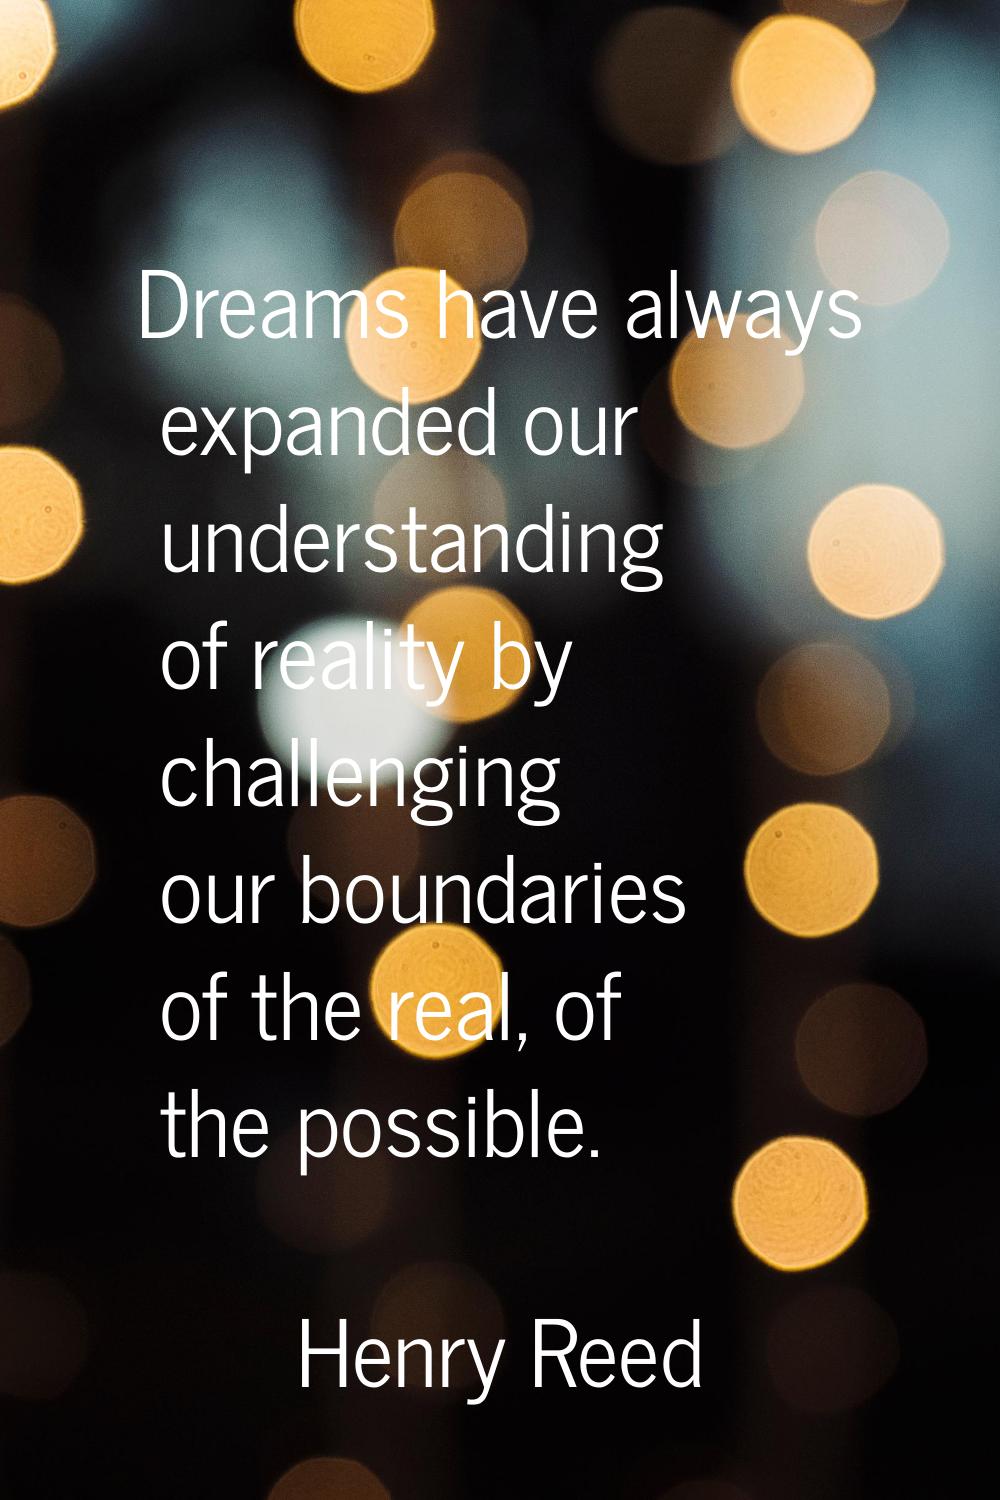 Dreams have always expanded our understanding of reality by challenging our boundaries of the real,